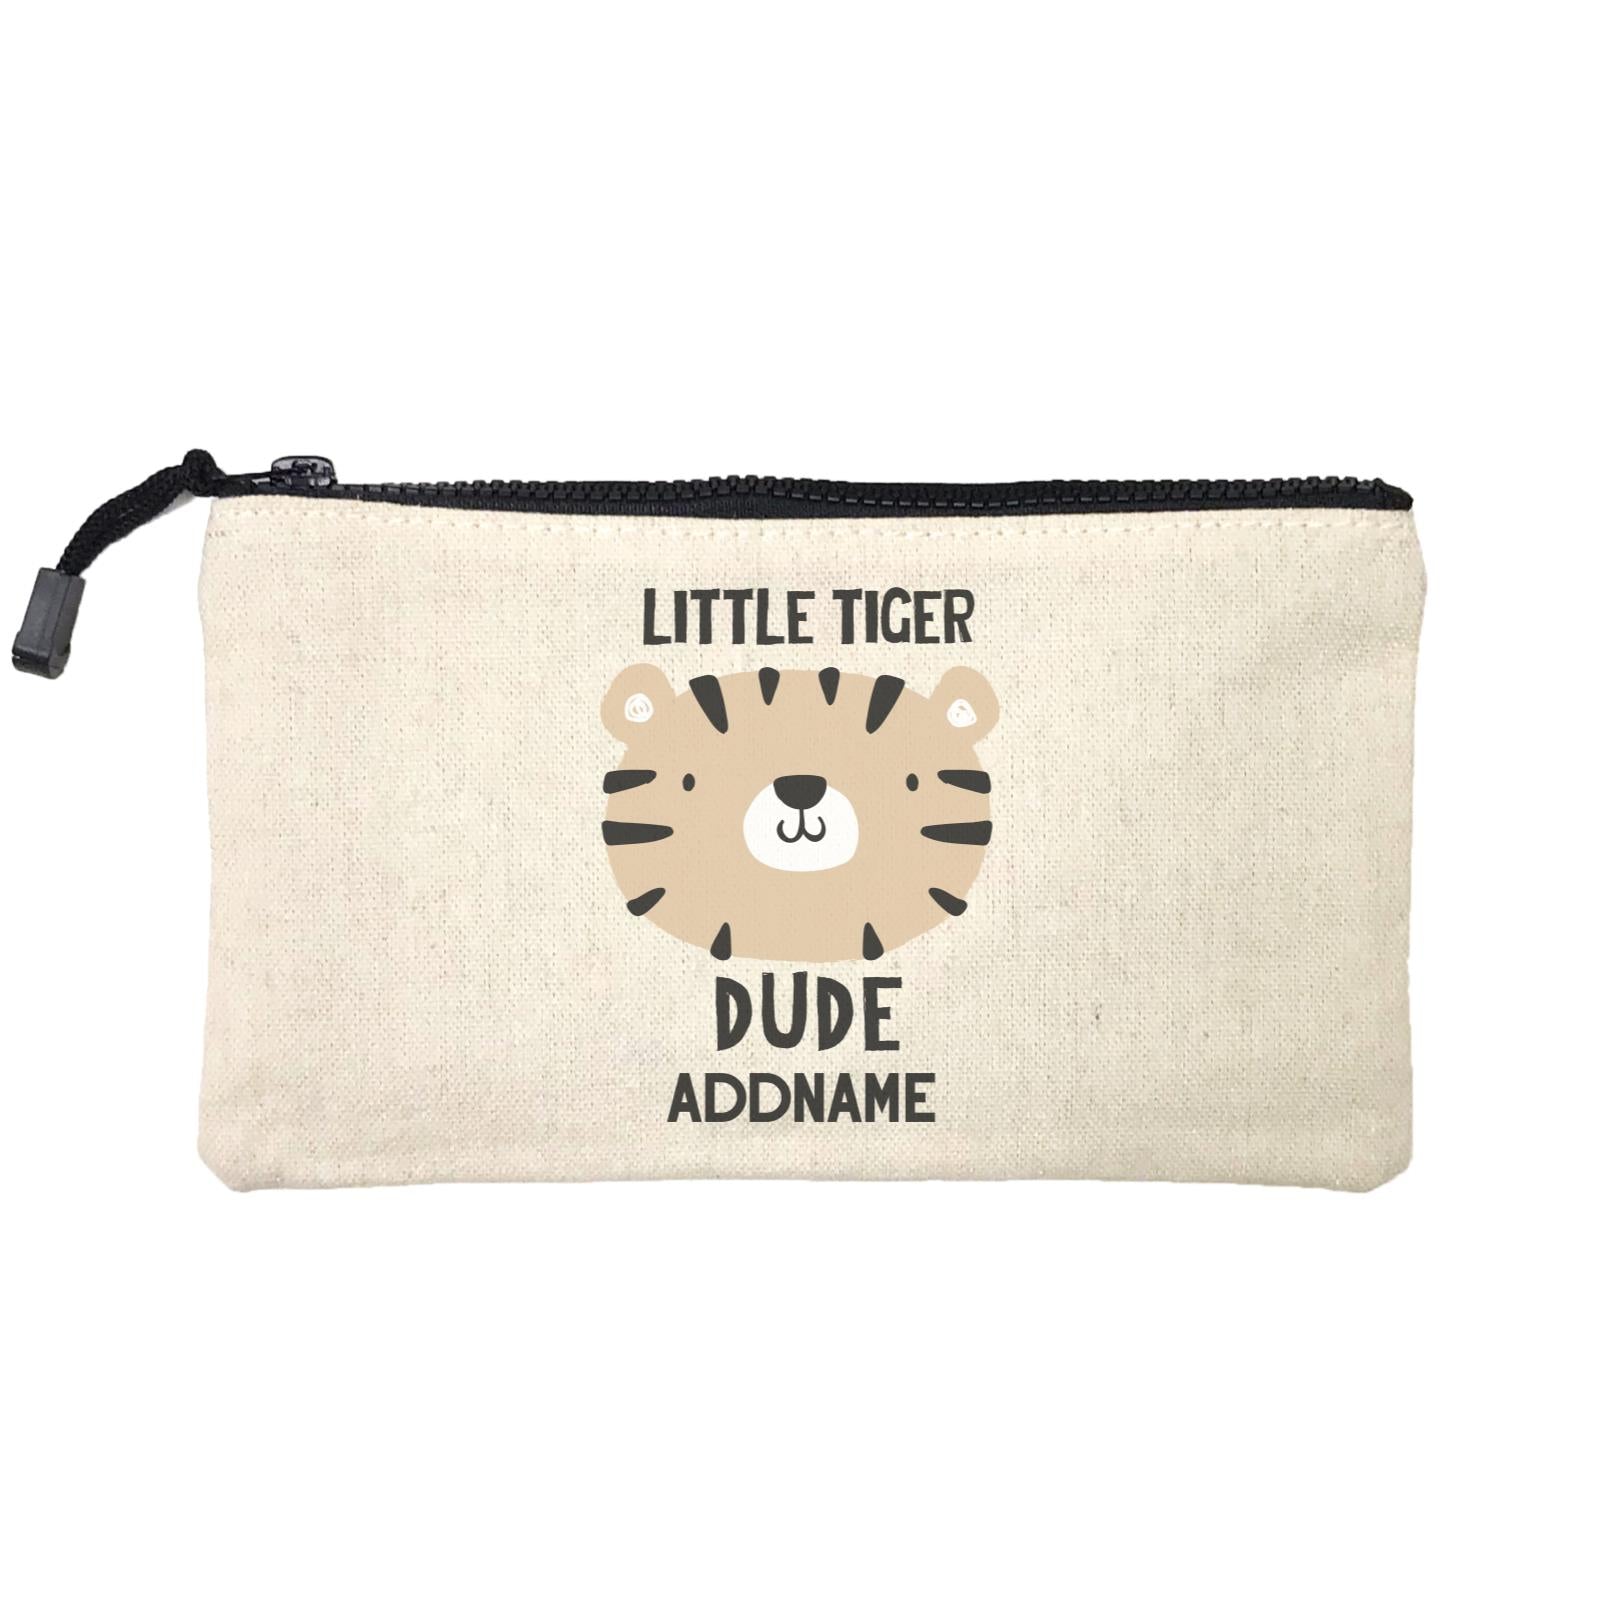 Little Tiger Dude Addname Mini Accessories Stationery Pouch